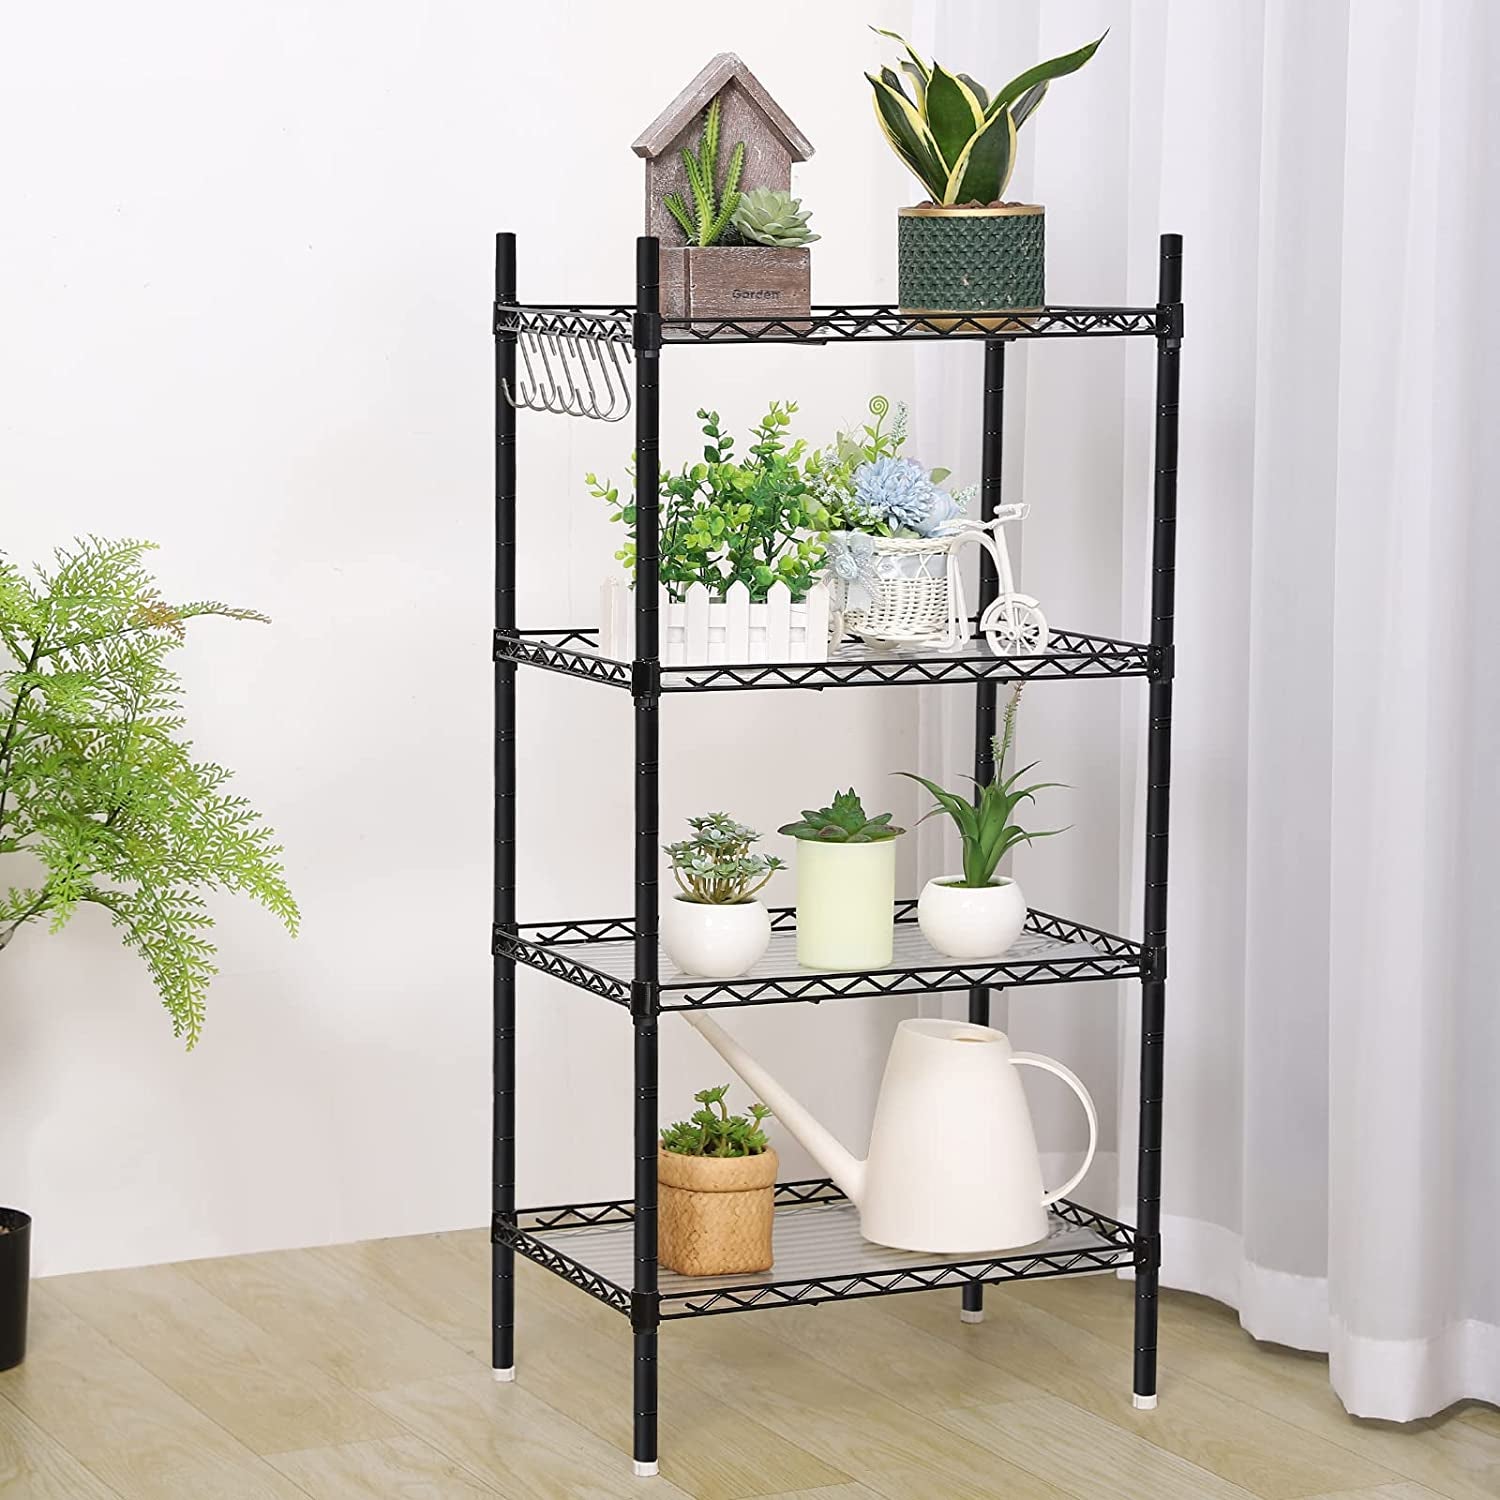 4 Tier Shelving Unit,  Metal Shelving Unit Free Standing Small Storage Rack with 4 Hooks, Wire Organisation Racking Shelves for for Pantry Kitchen Livingroom Bathroom Office, 45*30*90 CM